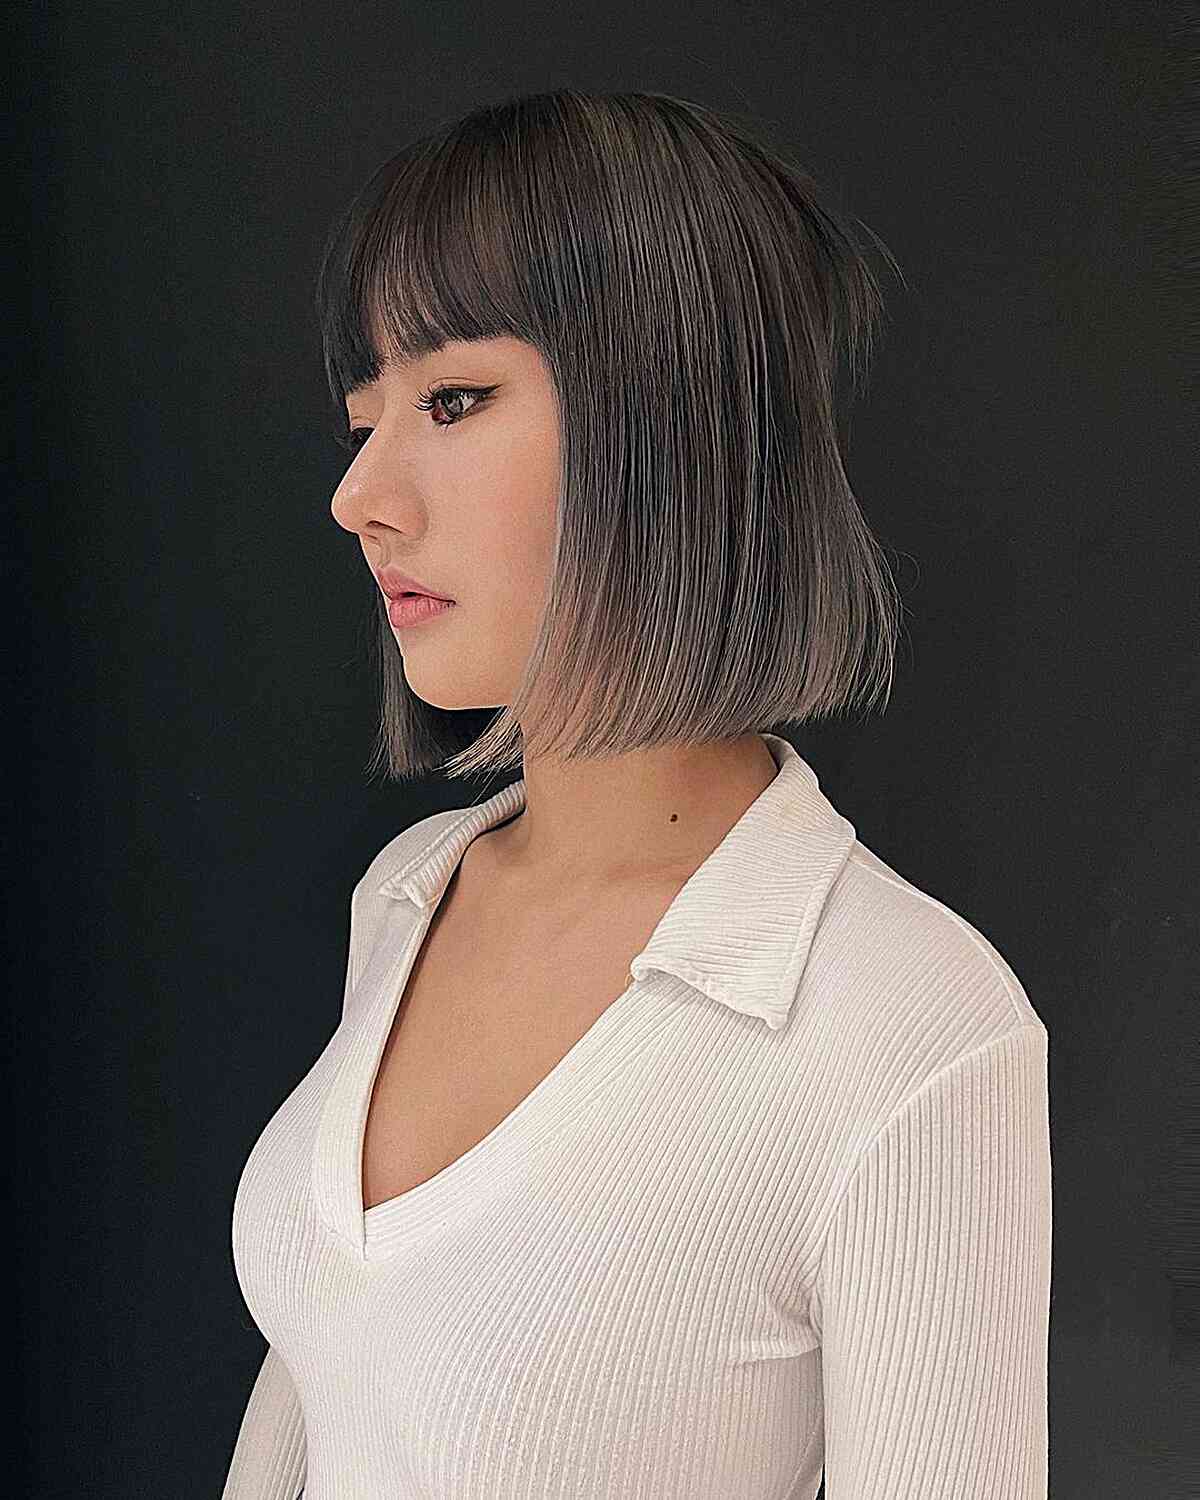 Neck-length Sleek Lob with See-Through Bangs for Oval-Shaped Faces and Dark Hair